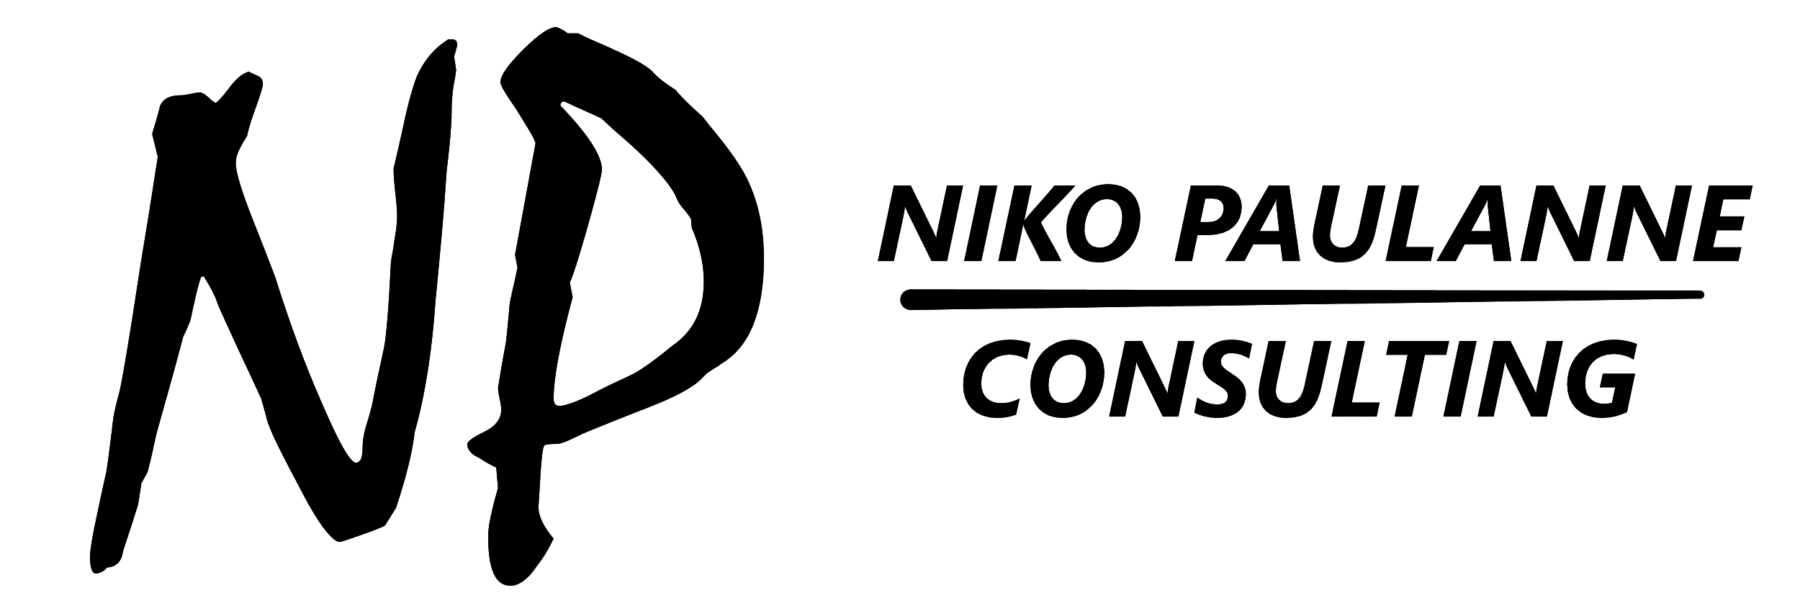 cropped-NP-Niko-Paulanne-Consulting-logo01-banner-2500×1000-1.png